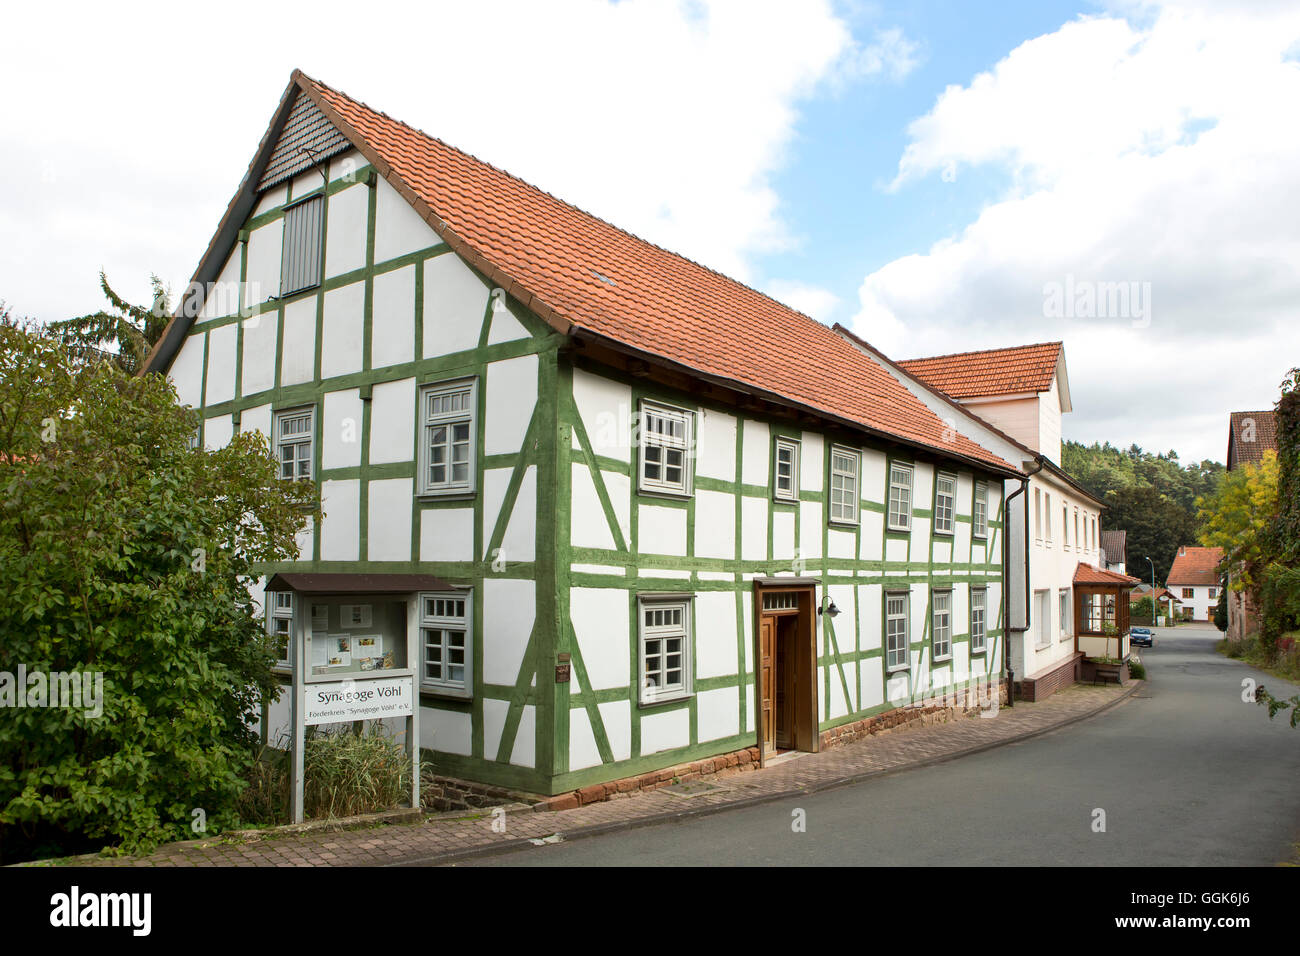 Exterior of Voehl Synagogue, housed in a half-timbered building, Voehl, Hesse, Germany, Europe Stock Photo